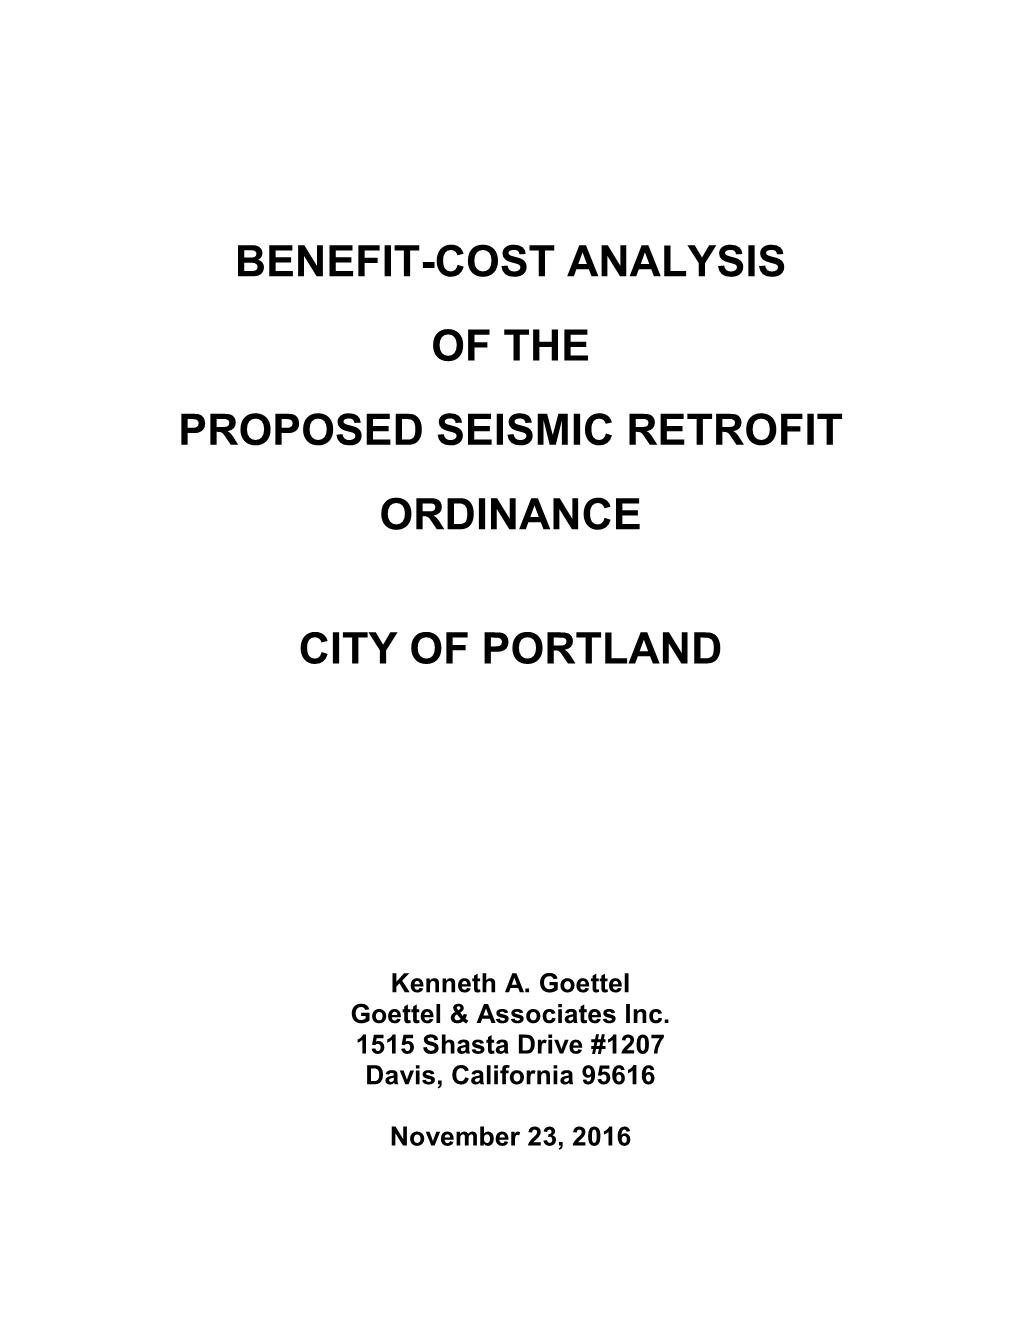 Benefit-Cost Analysis of the Proposed Seismic Retrofit Ordinance City of Portland